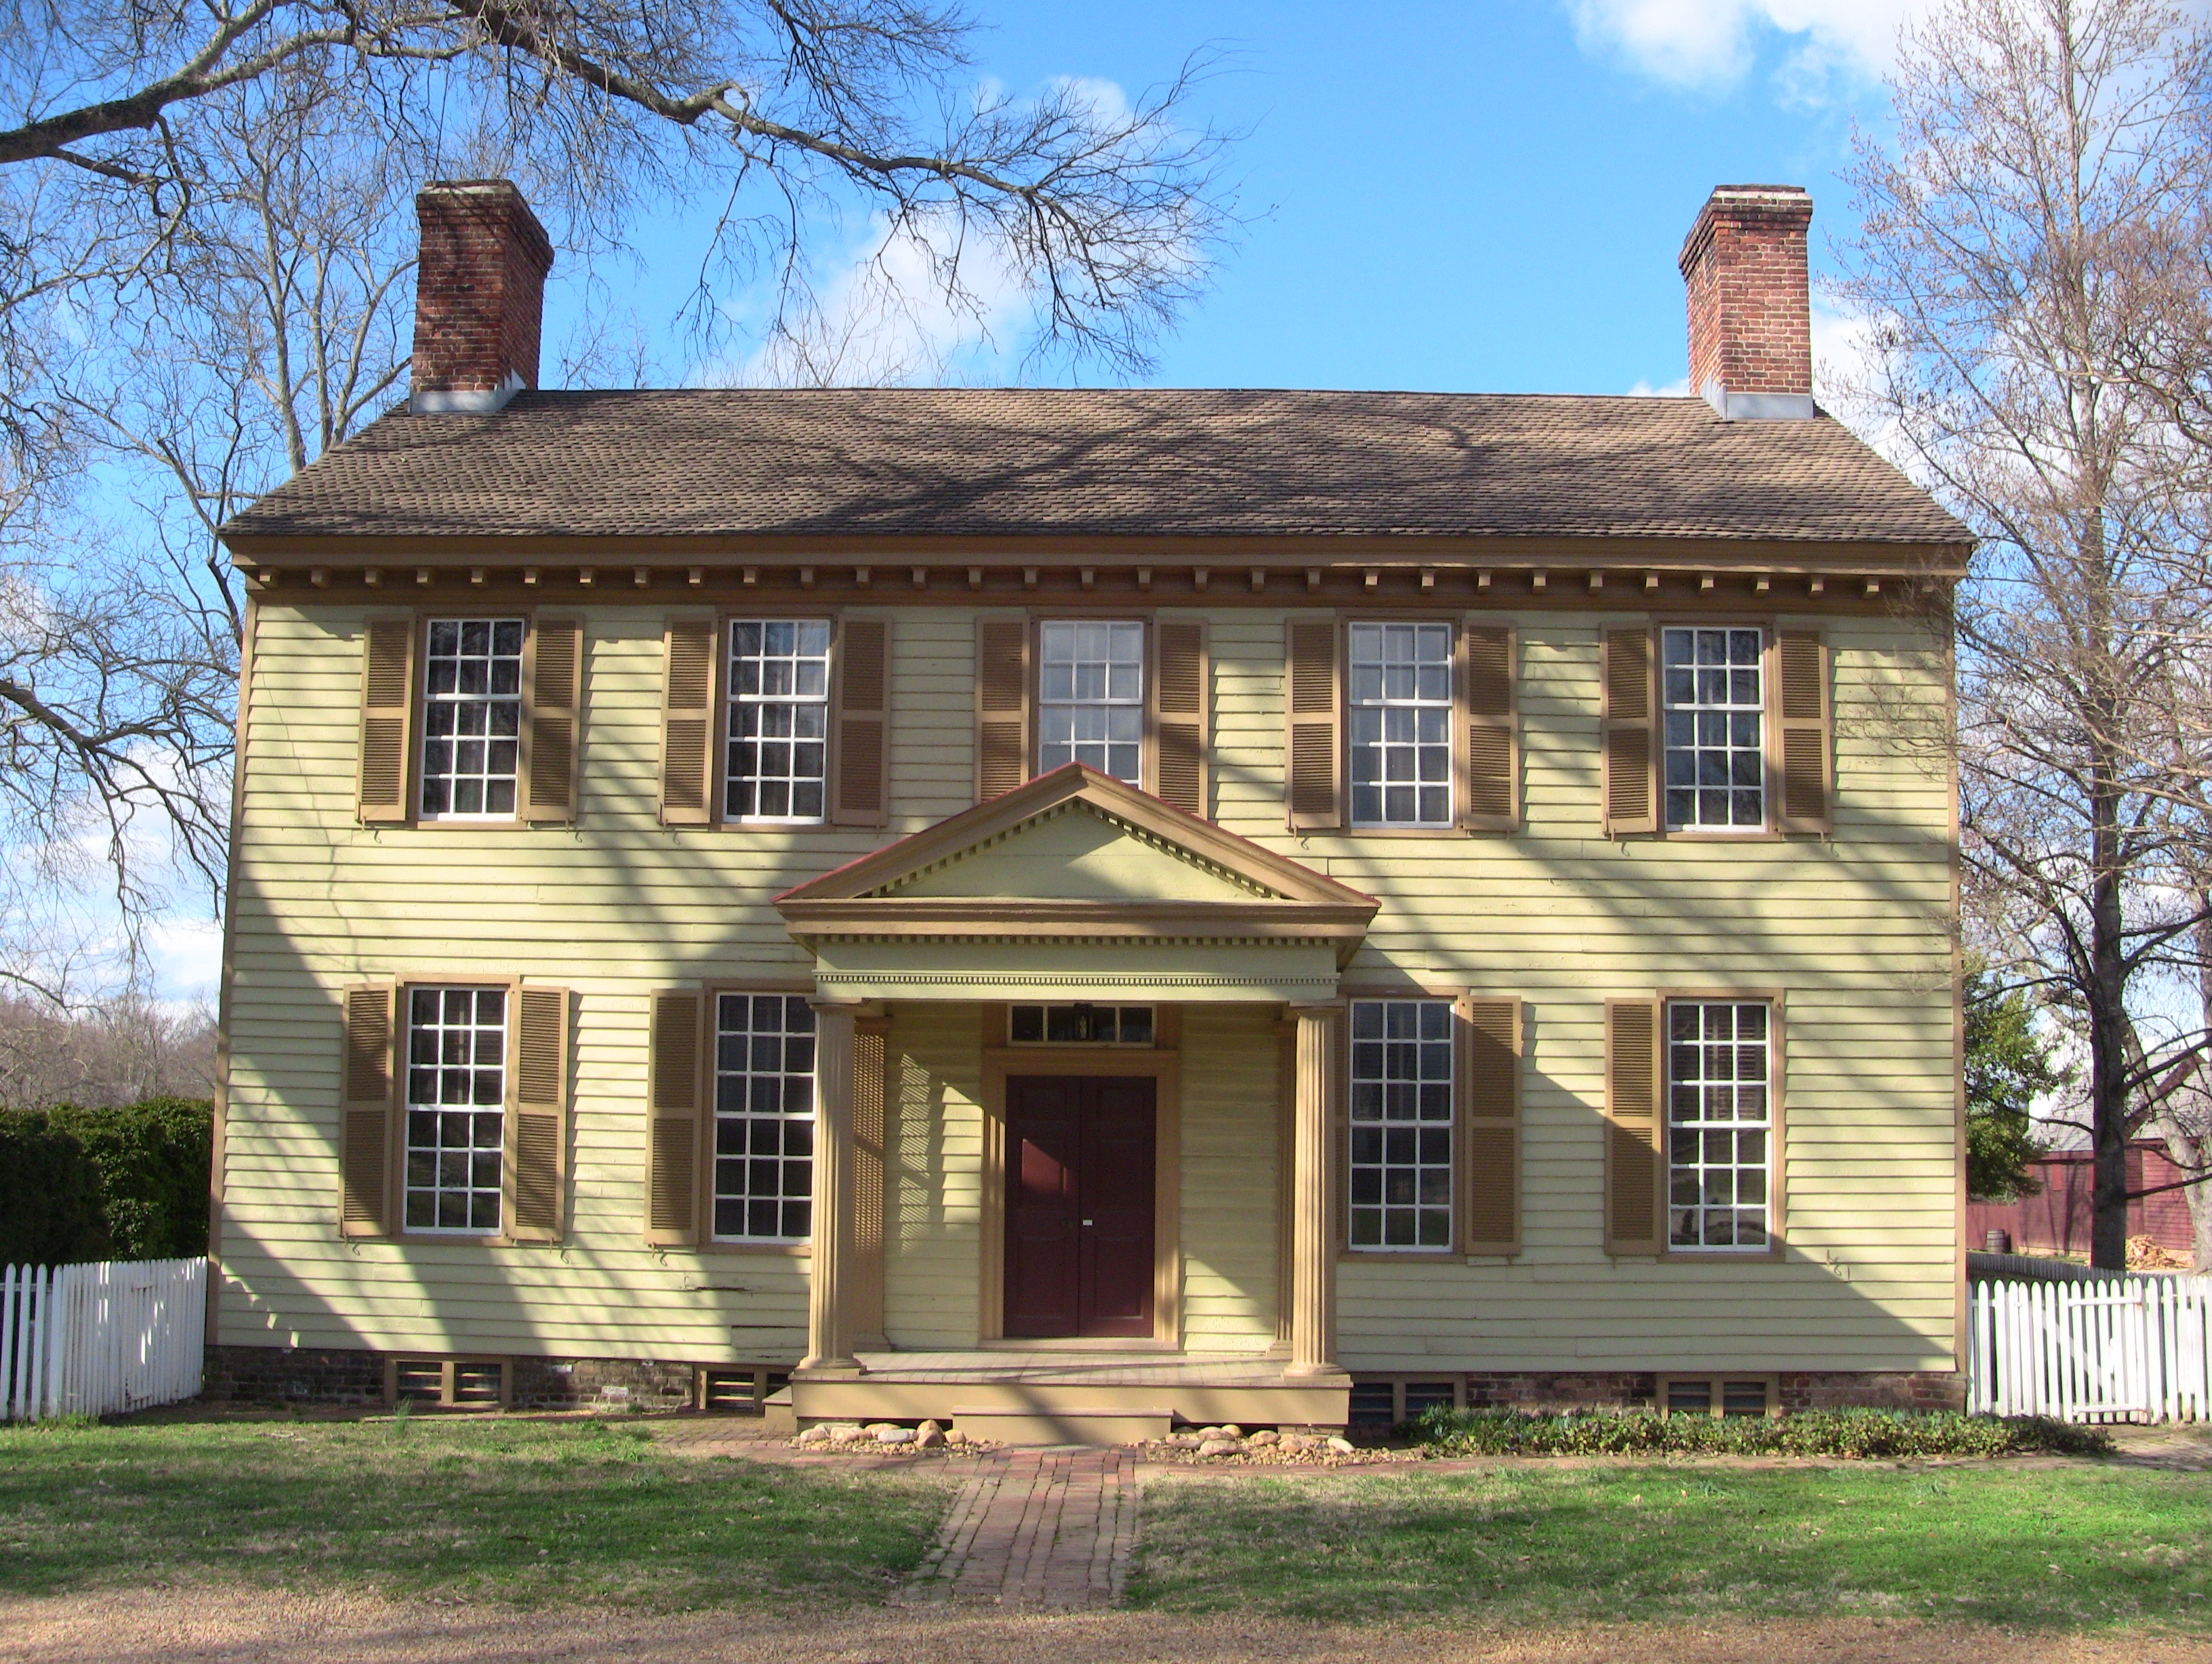 Colonial Williamsburg is my Disneyland | The Renaissance Woodworker